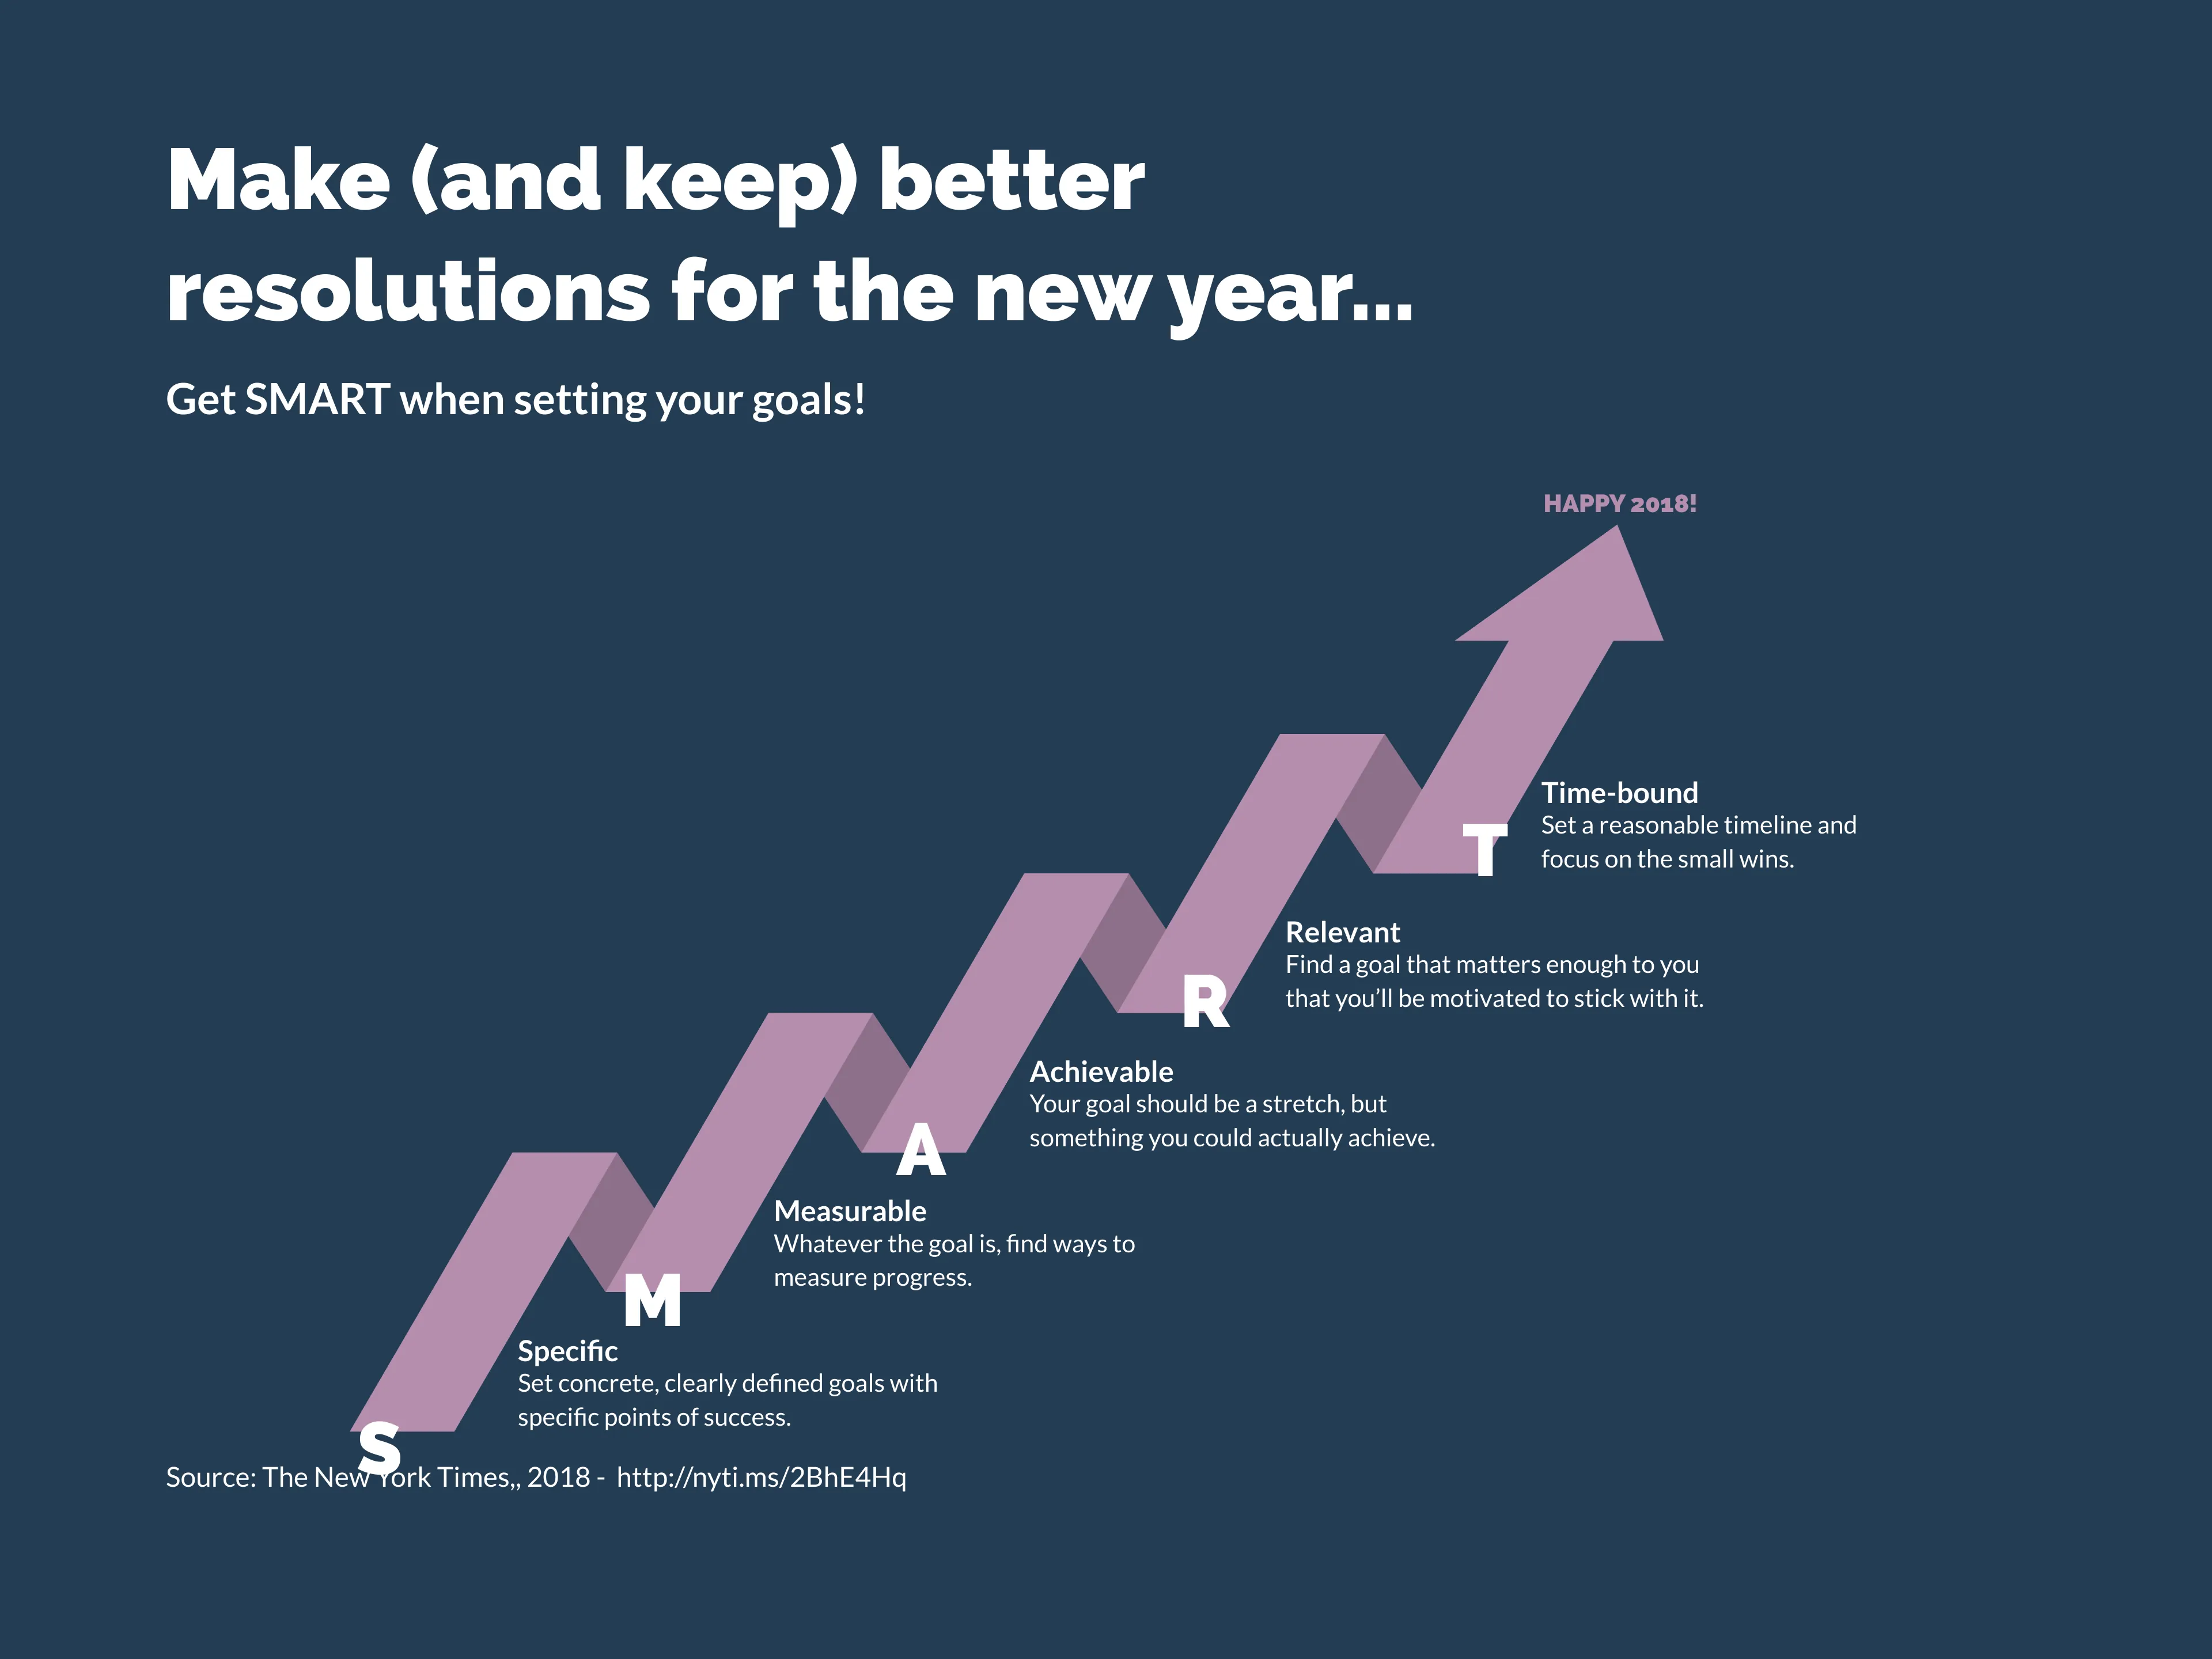 Make (and keep) better resolutions for the new year